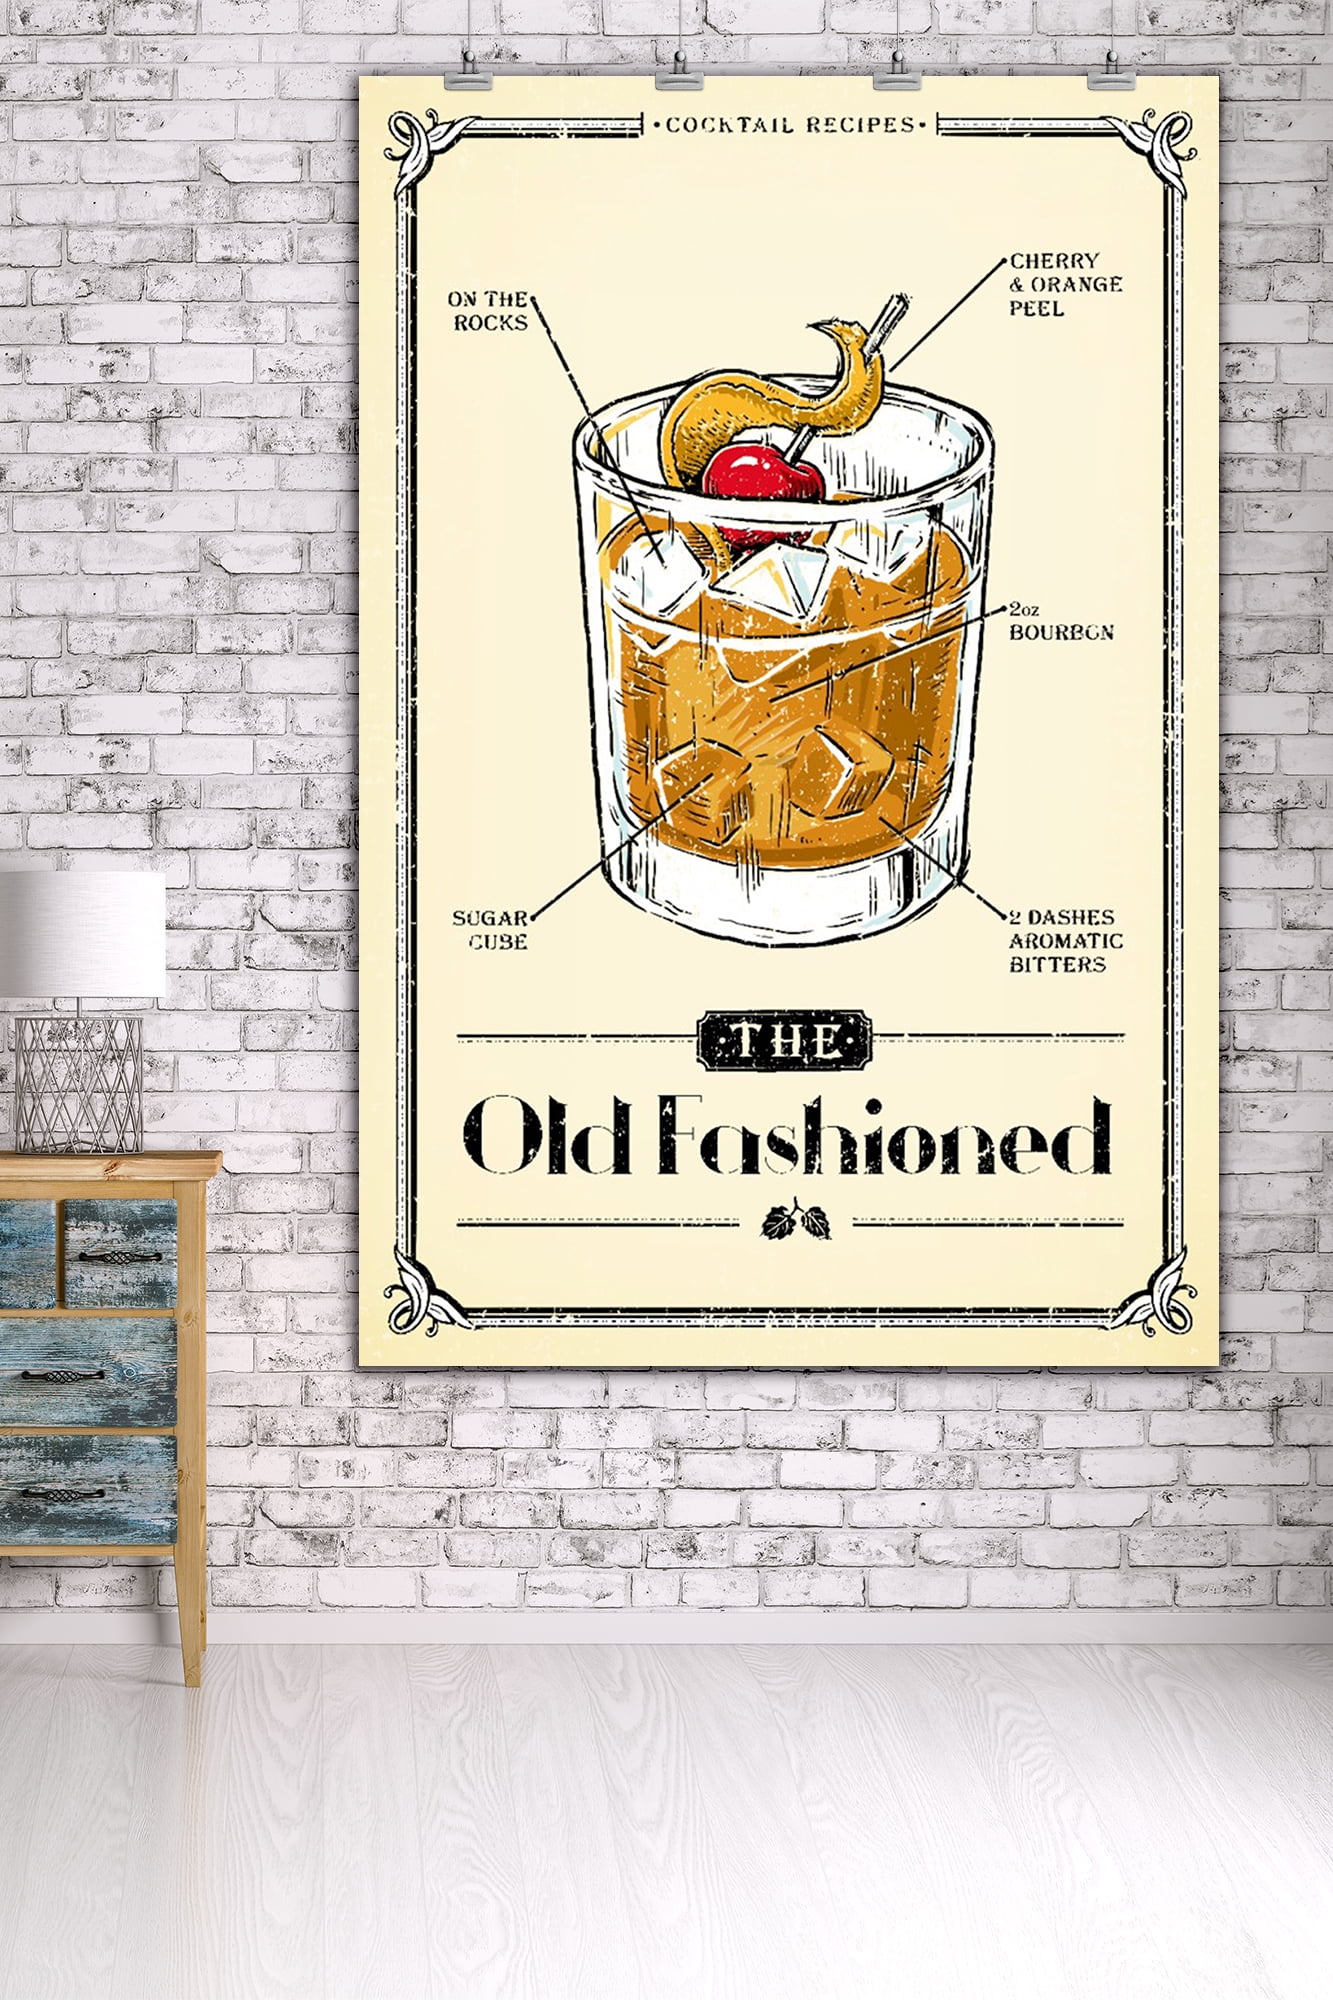 Prohibition Ends Here Drink Up (24x36 Giclee Gallery Art Print, Vivid  Textured Wall Decor) 